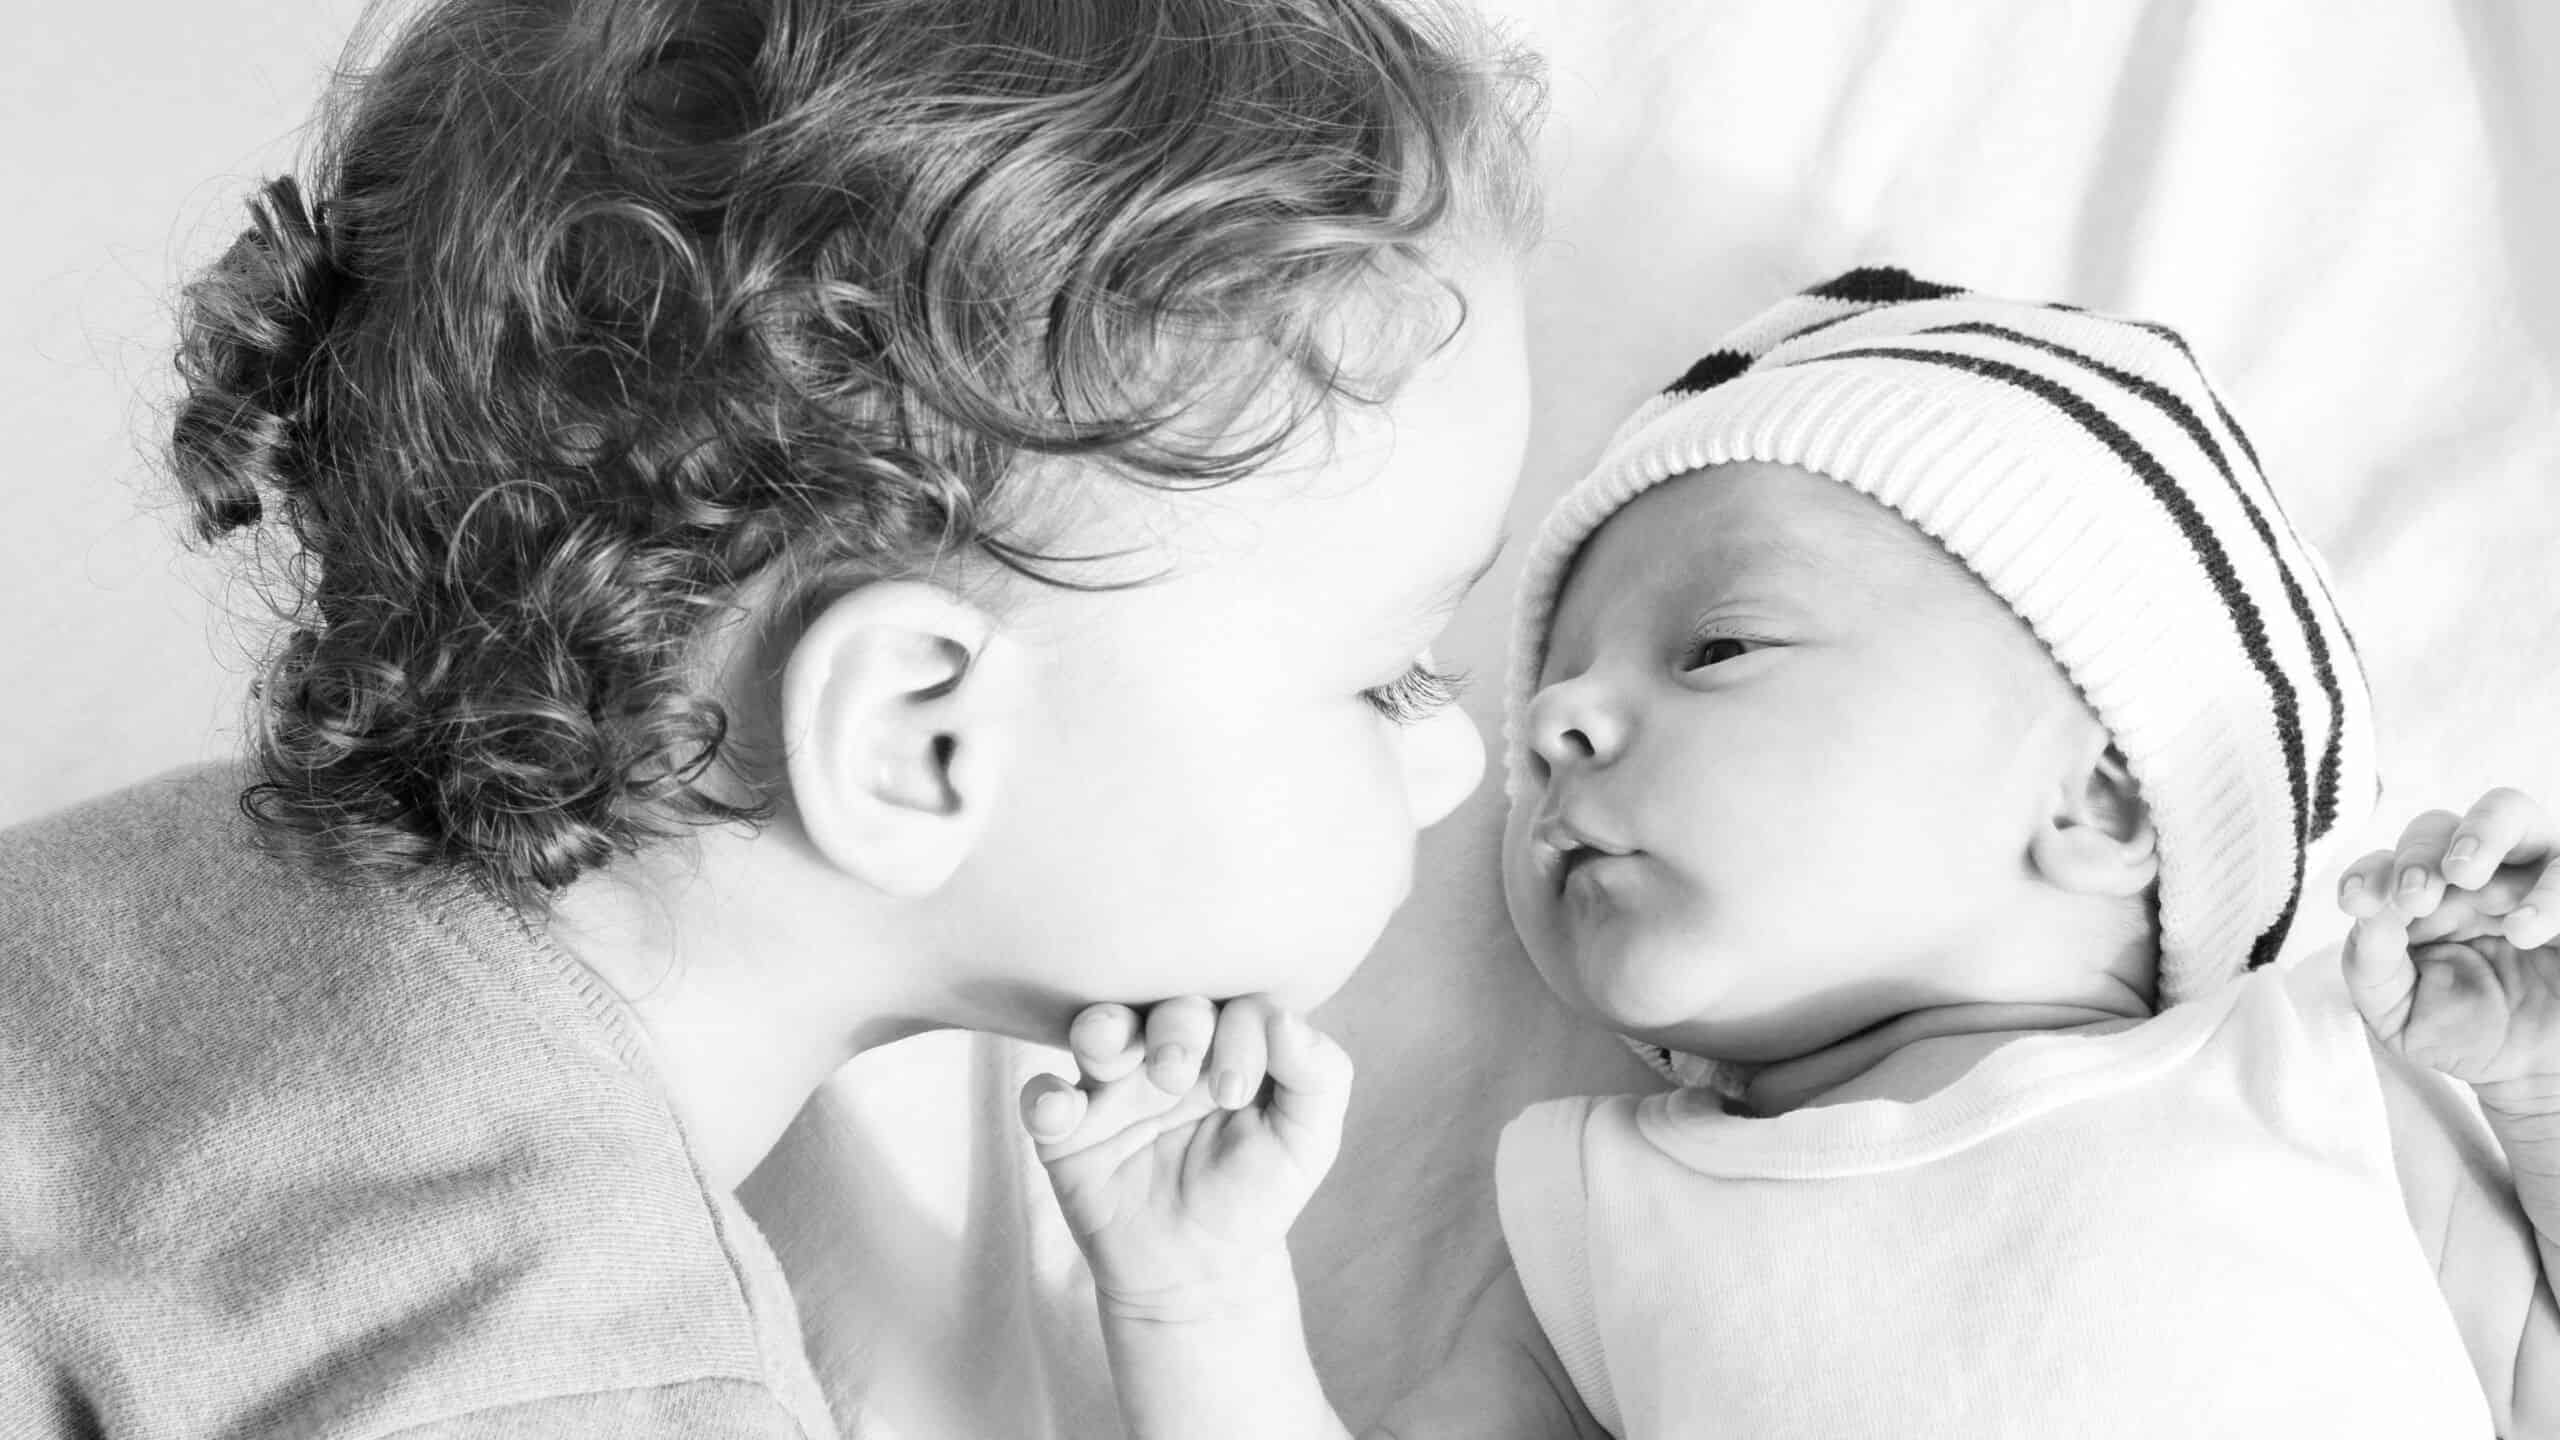 5 Things Birth Order Predicts About a Child’s Future